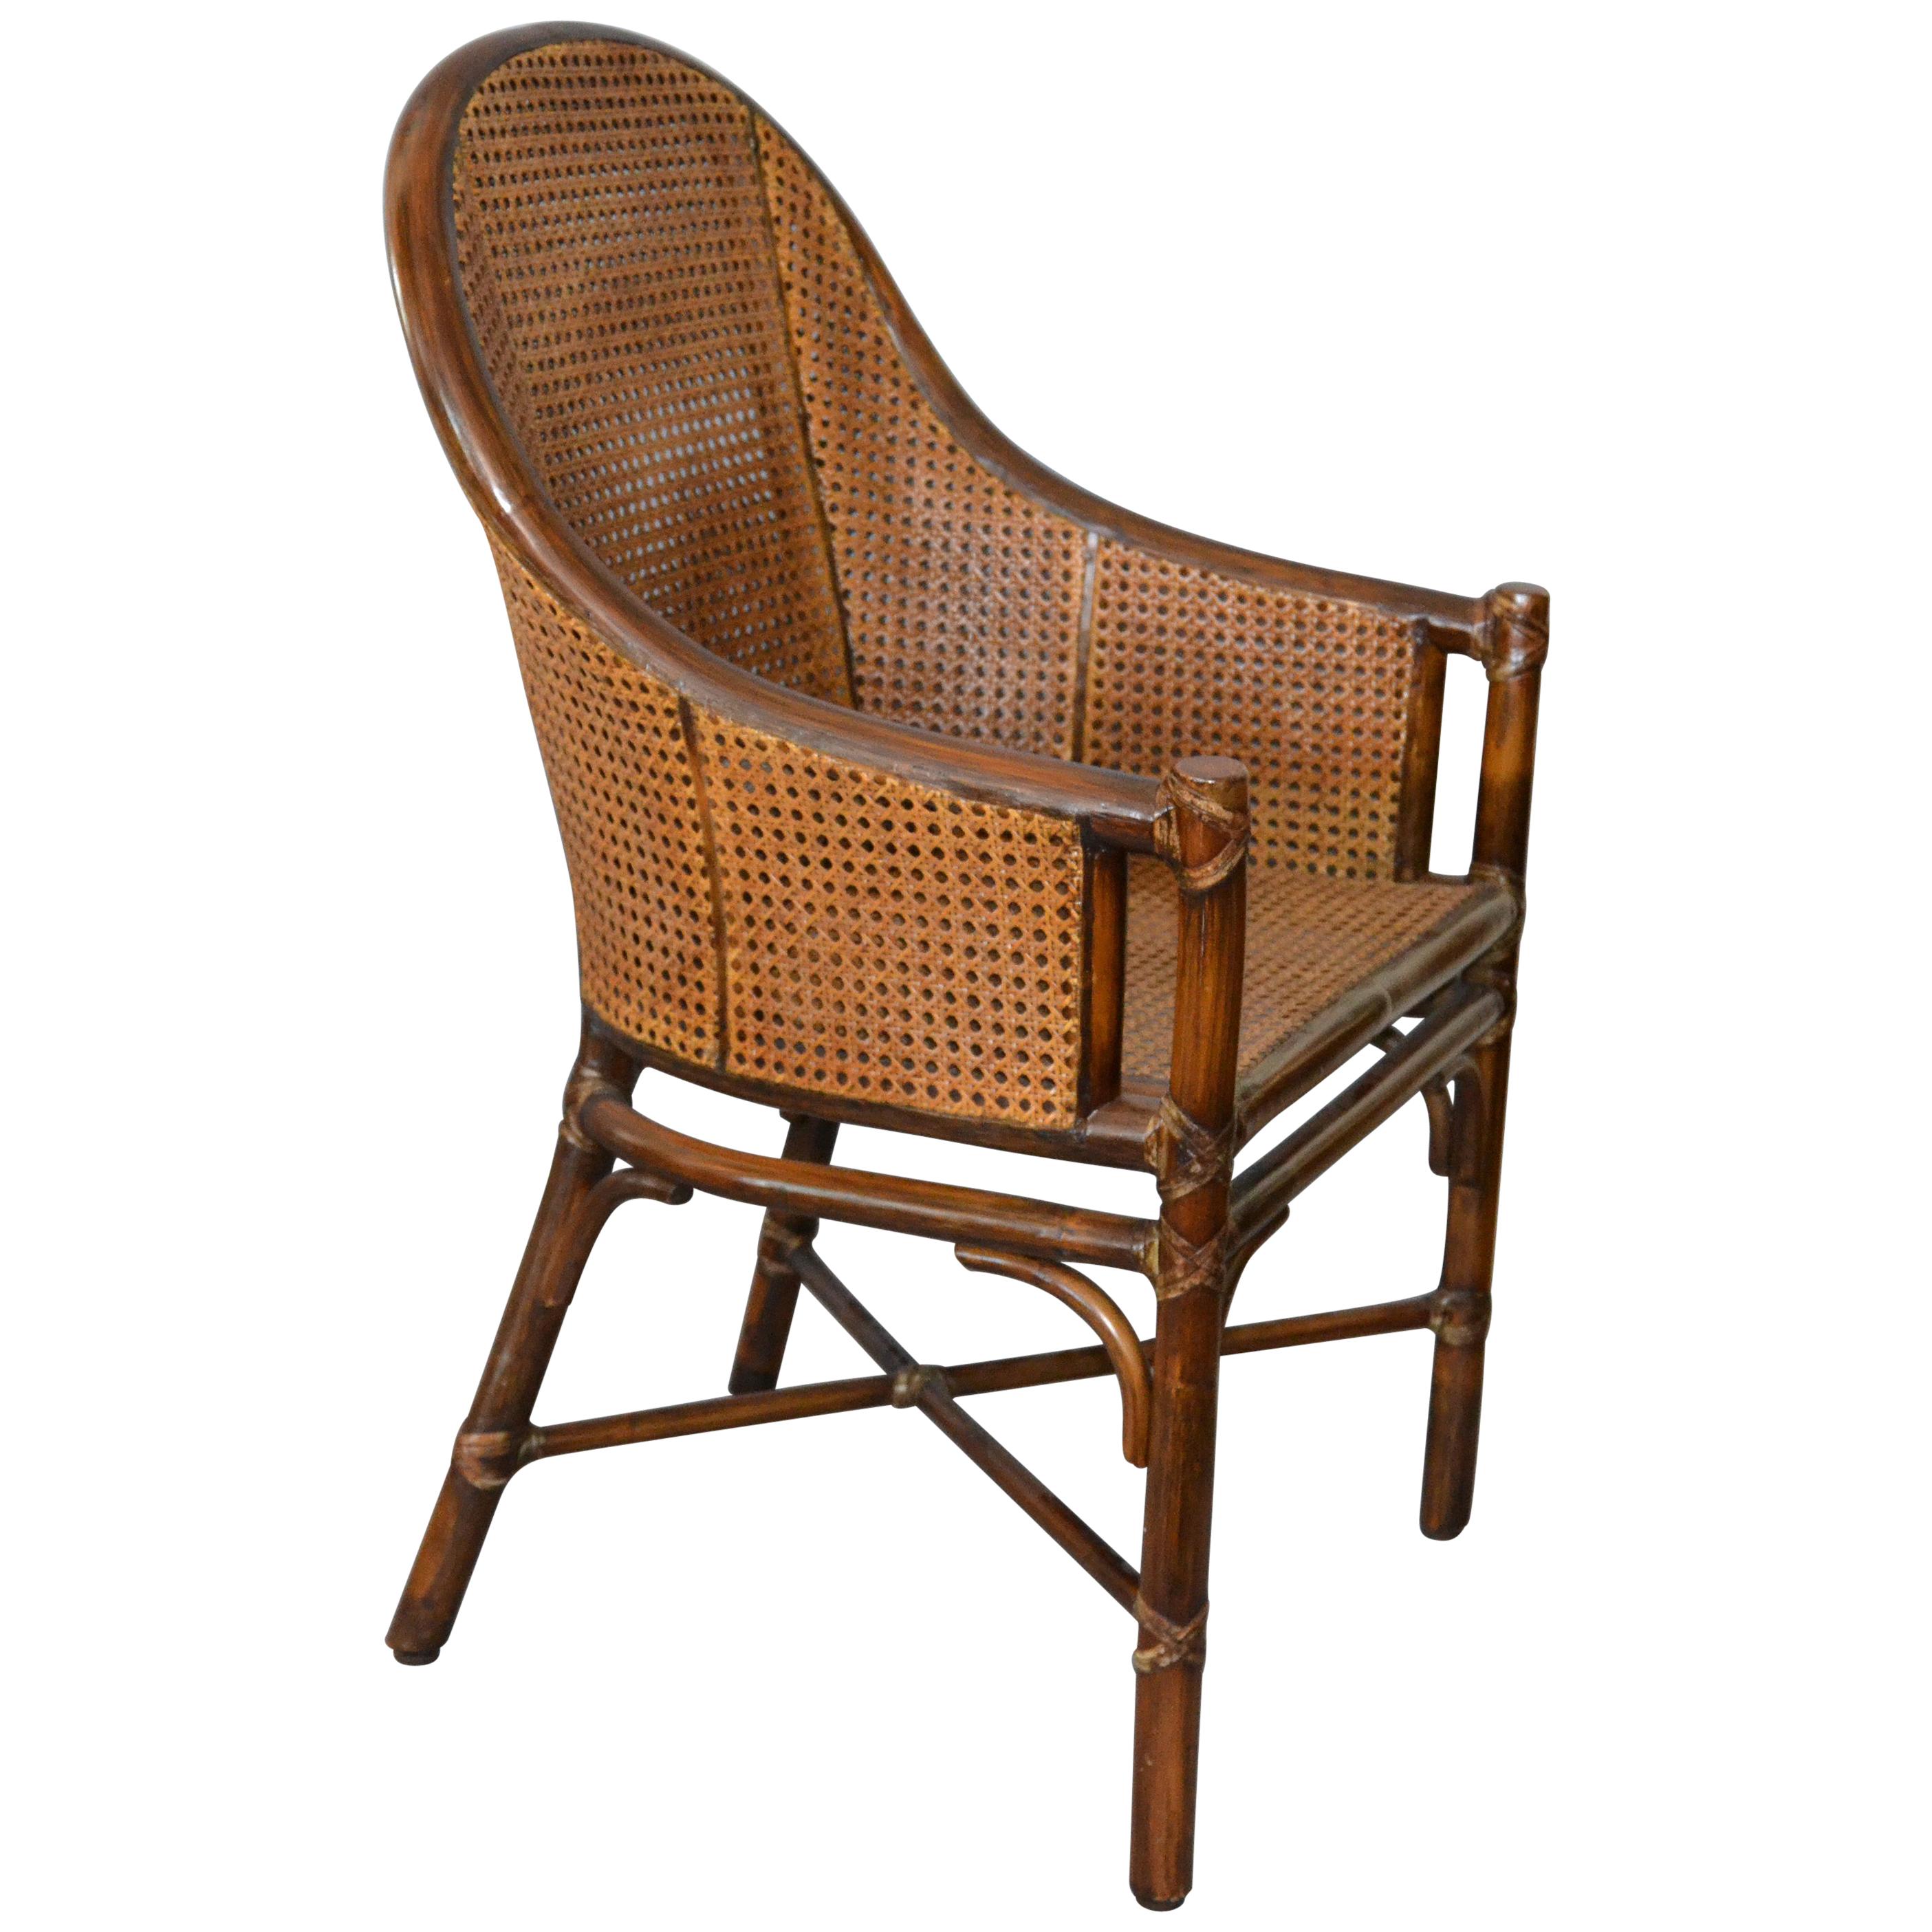 McGuire Mid-Century Modern Bamboo and Cane Armchair Leather Bindings, Desk Chair